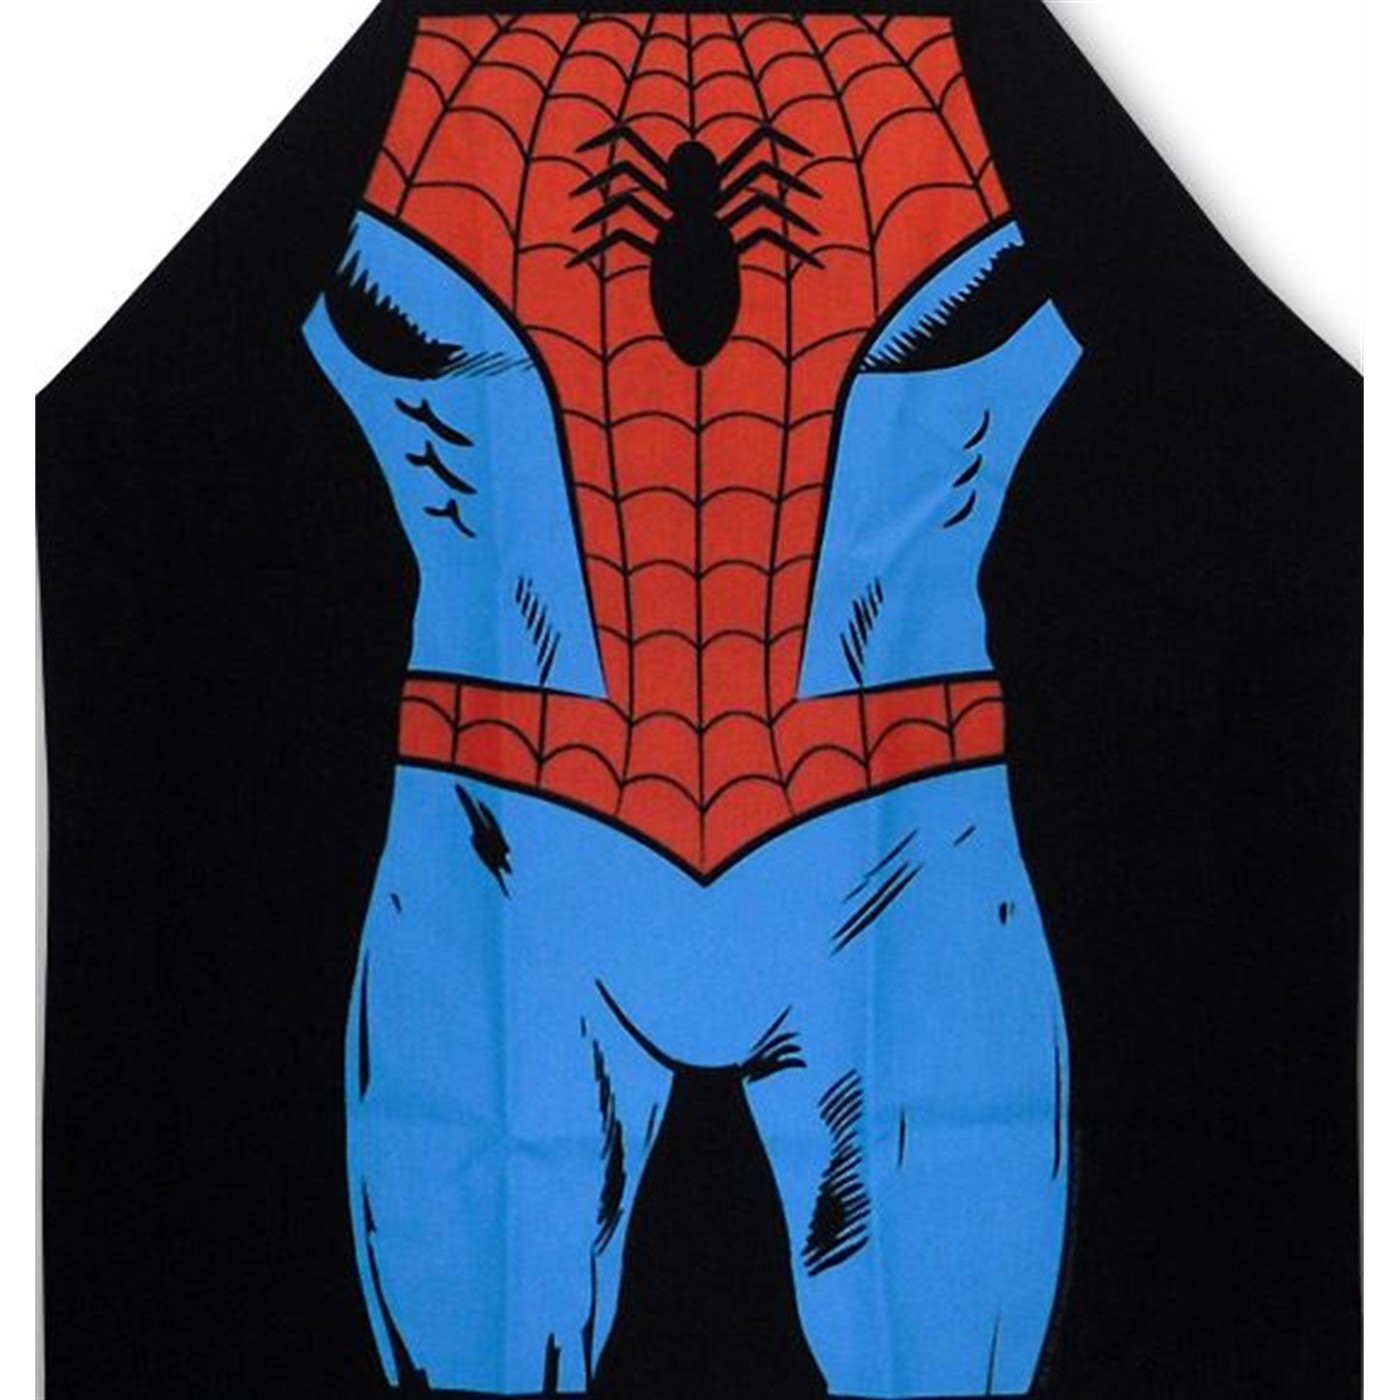 Spiderman Figure Cooking Apron